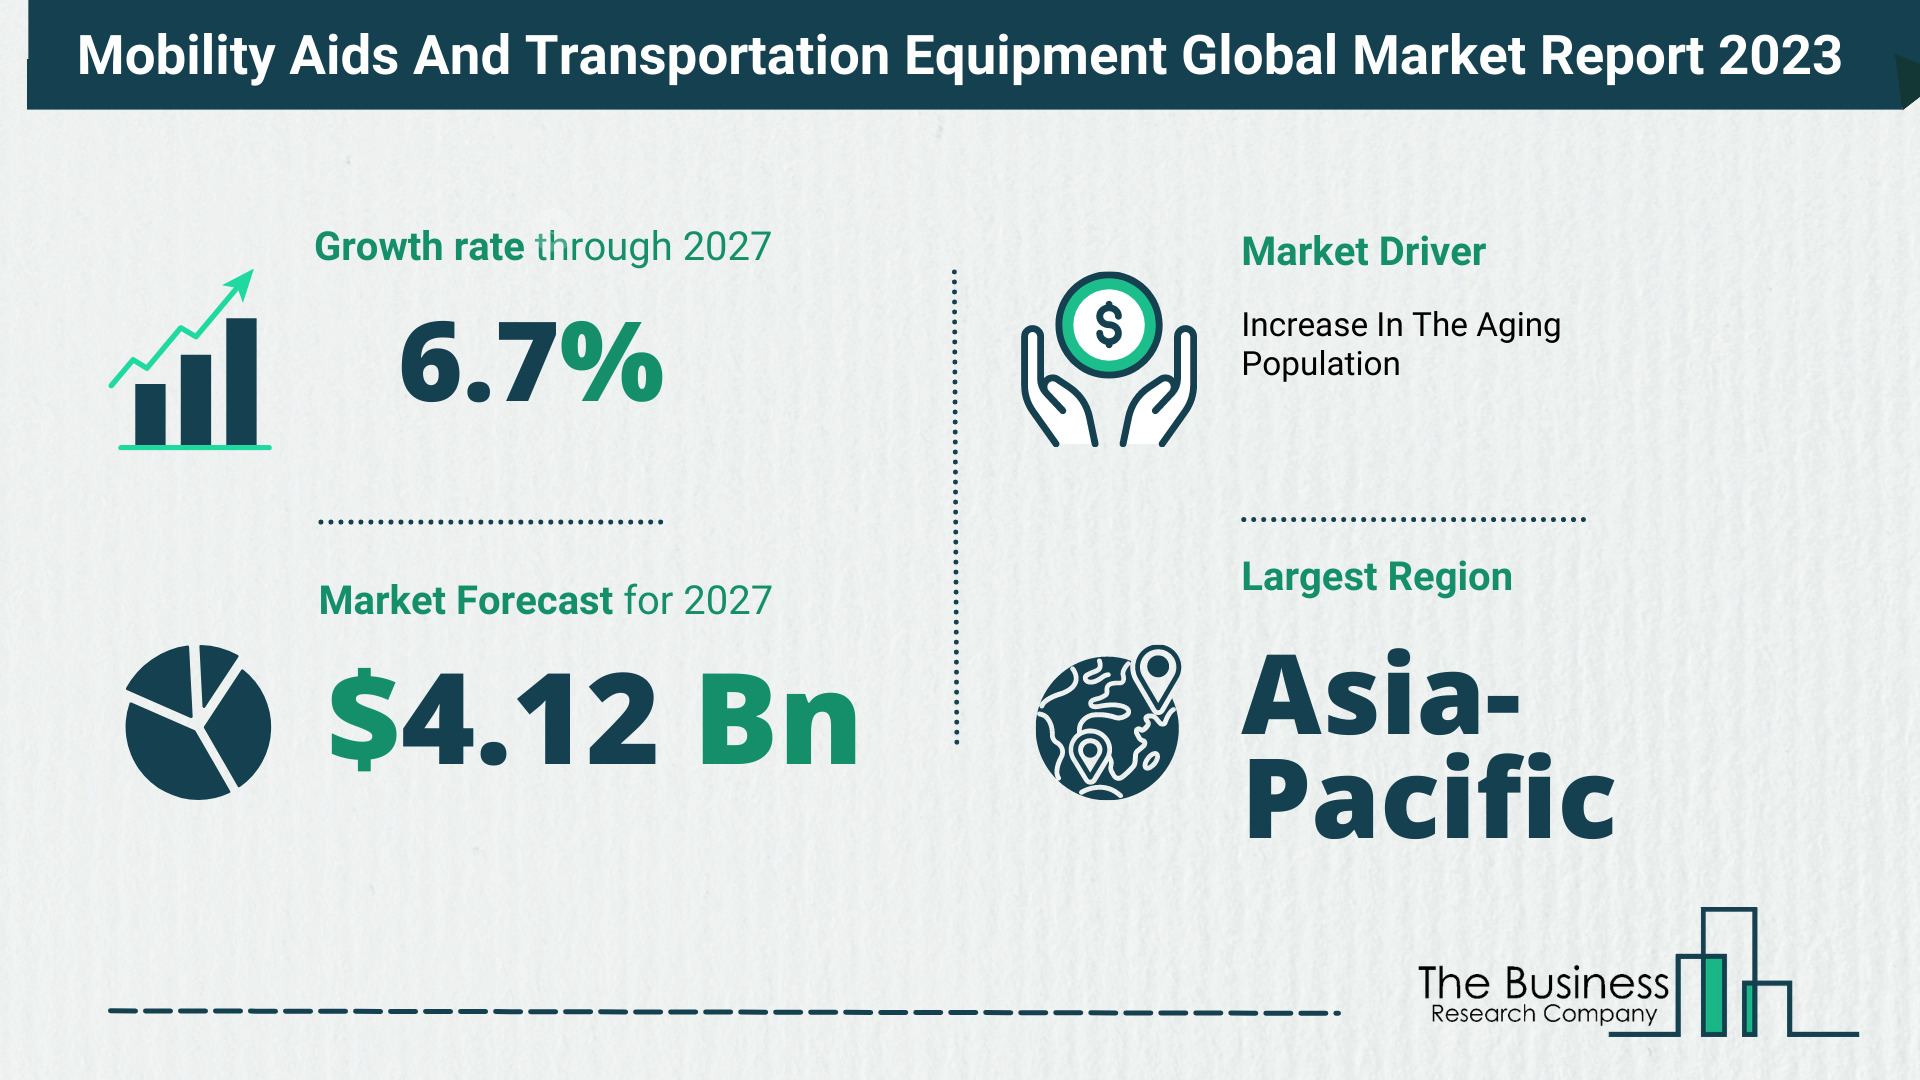 Comprehensive Mobility Aids And Transportation Equipment Market Analysis, By The Business Research Company